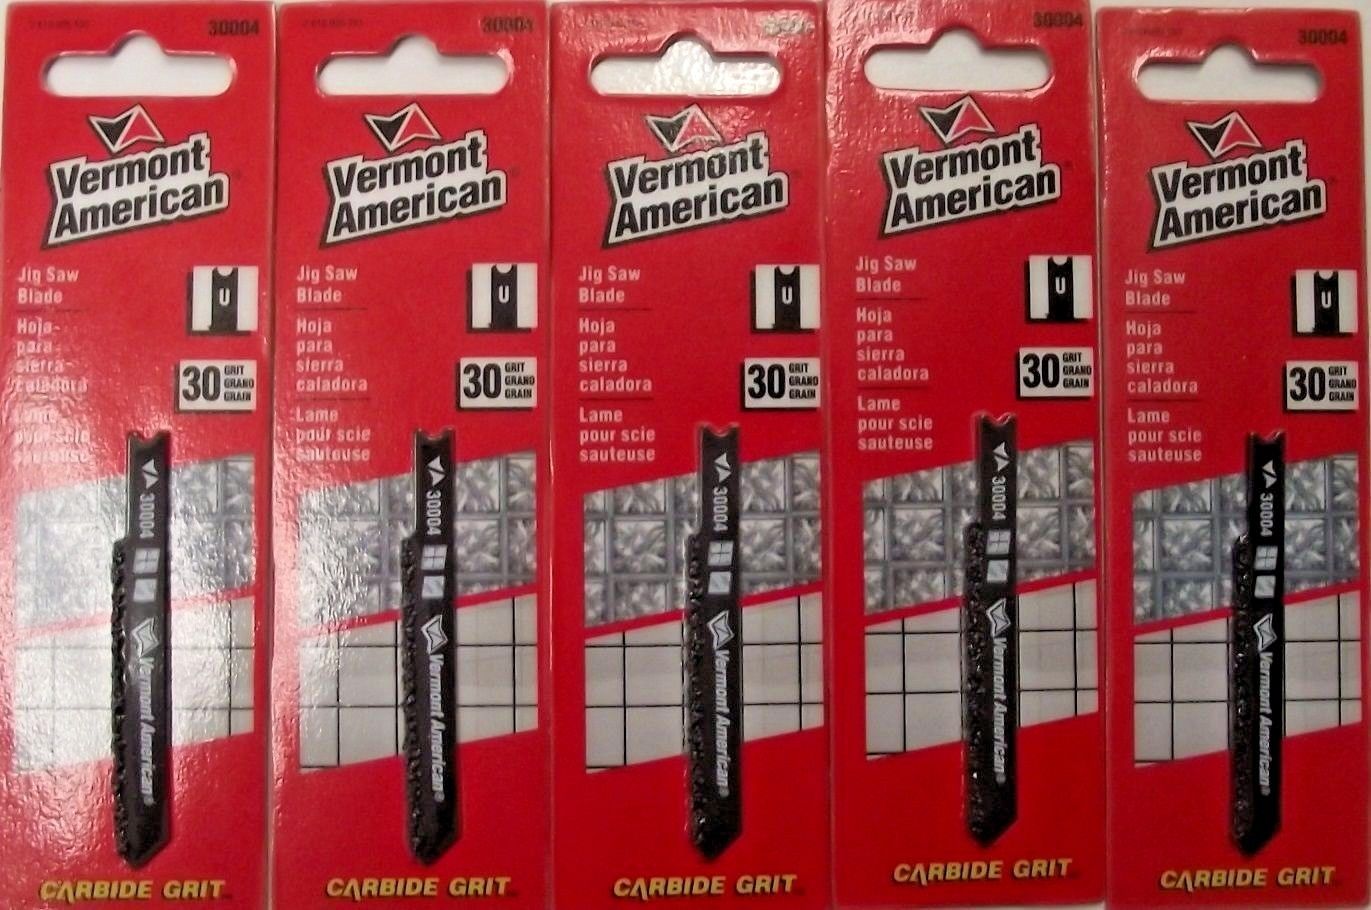 Vermont American 30004 2-7/8" Carbide Grit Tooth Tile Jig Saw Blade 5PKS